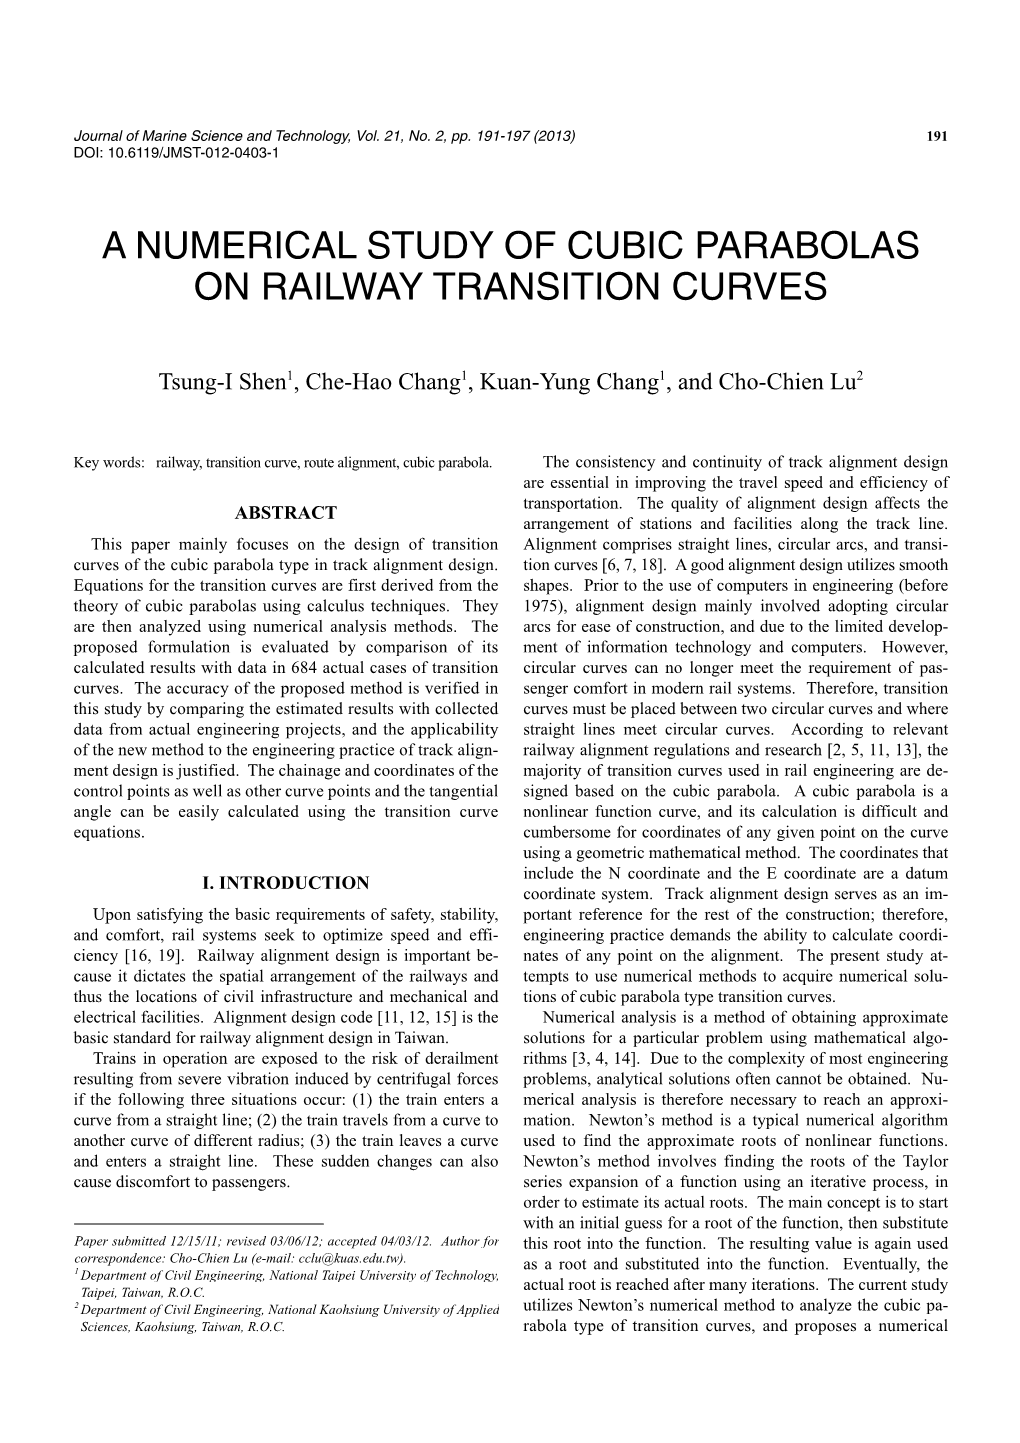 A Numerical Study of Cubic Parabolas on Railway Transition Curves